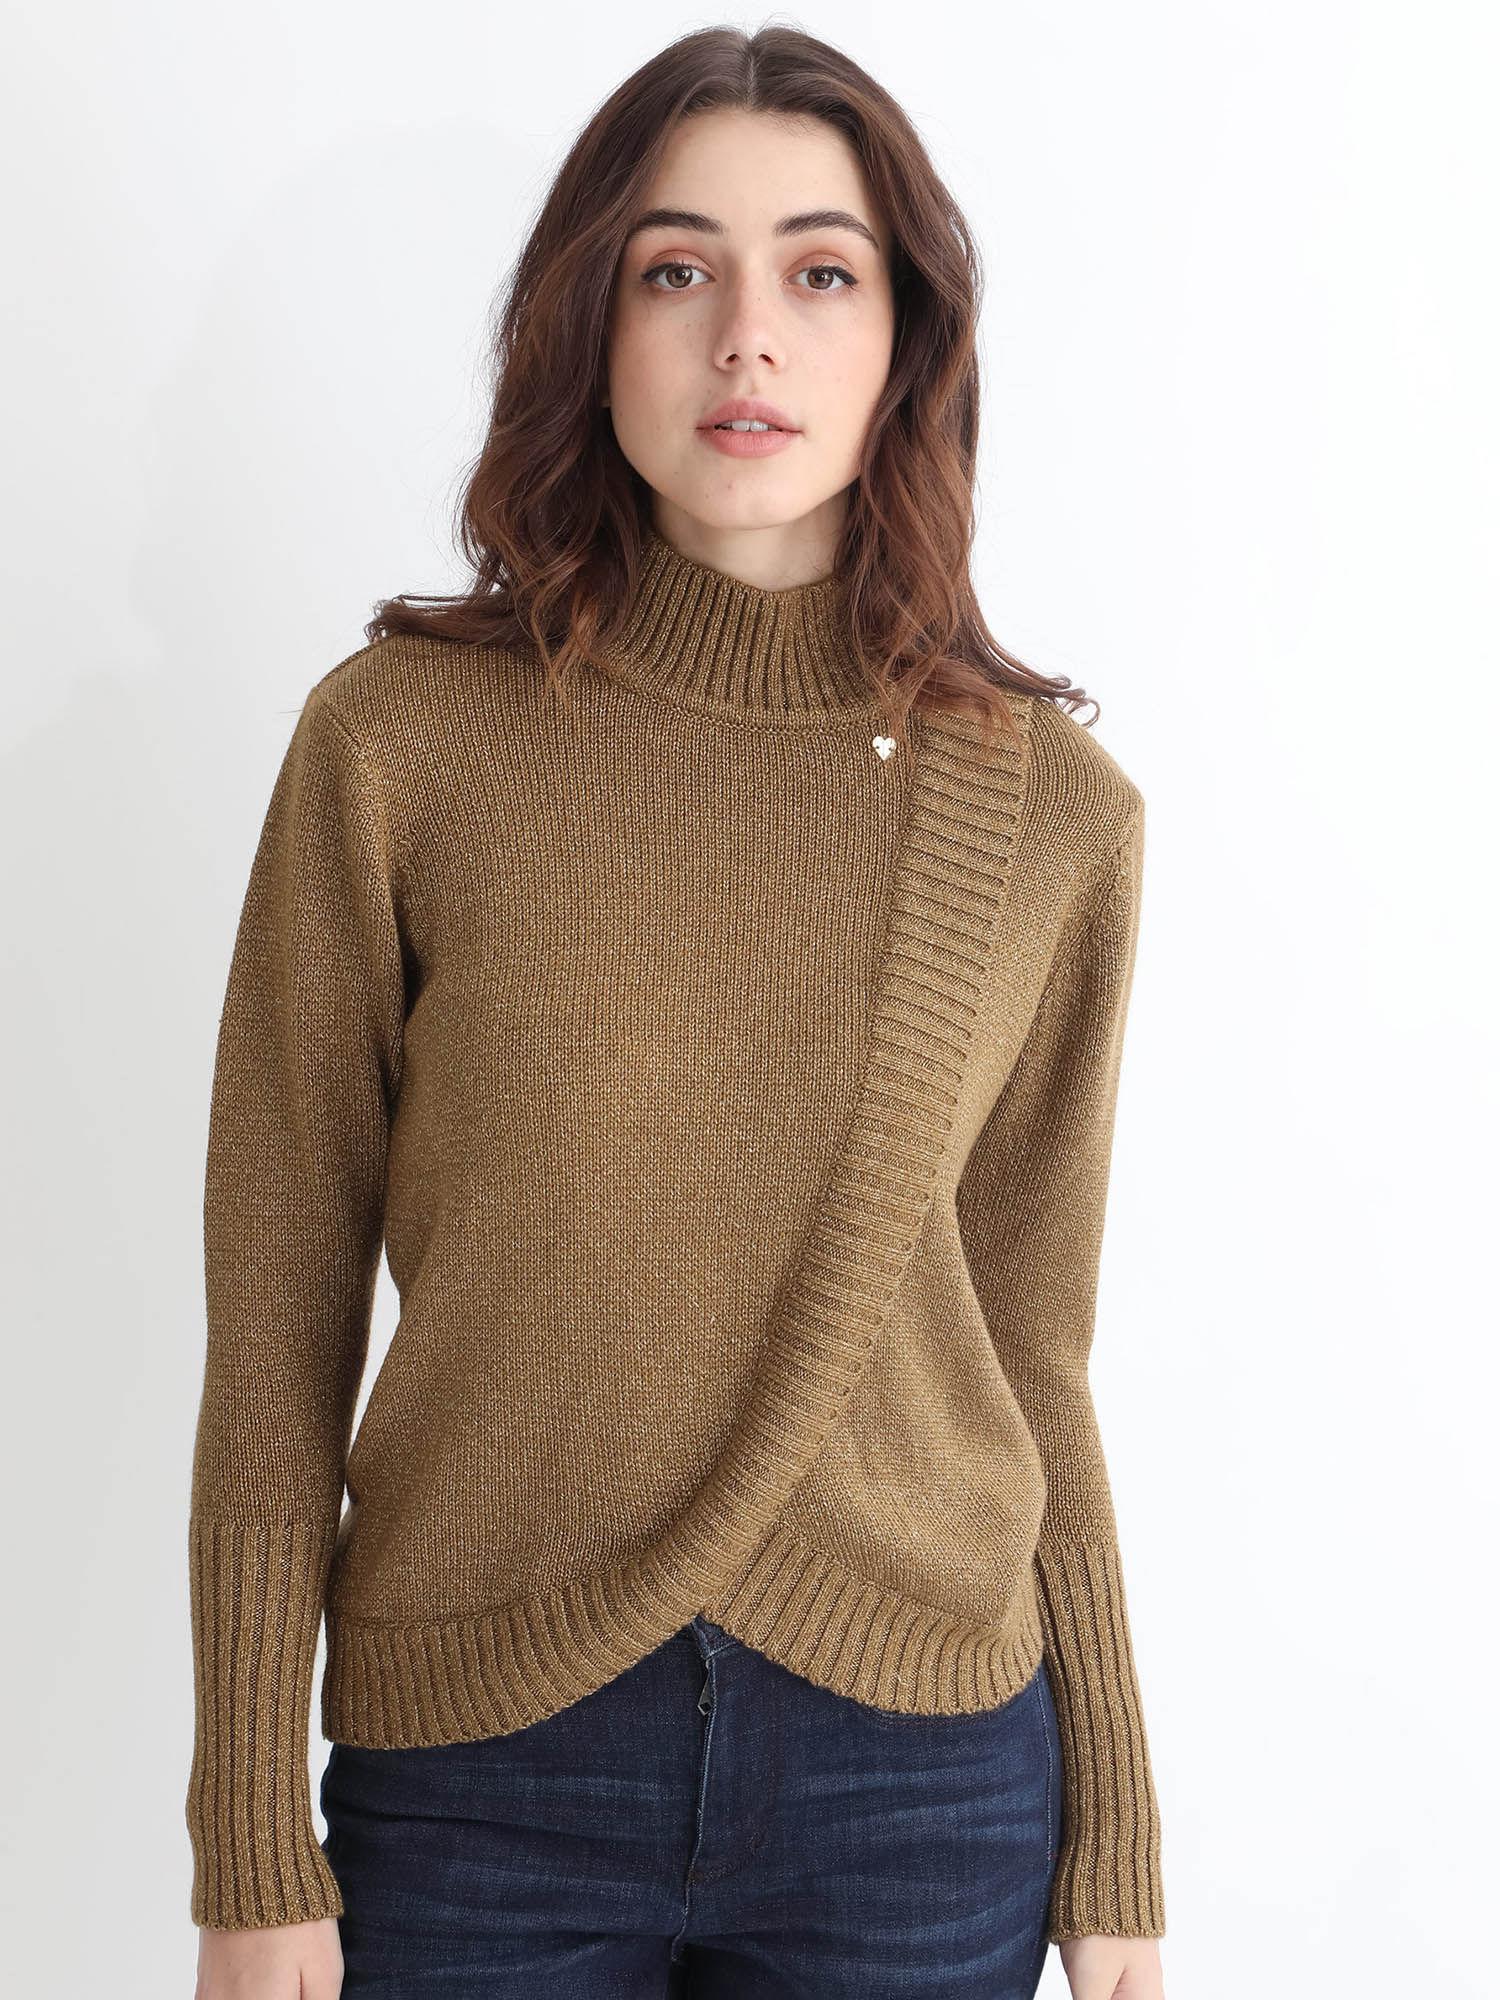 austern primary brown solid sweater